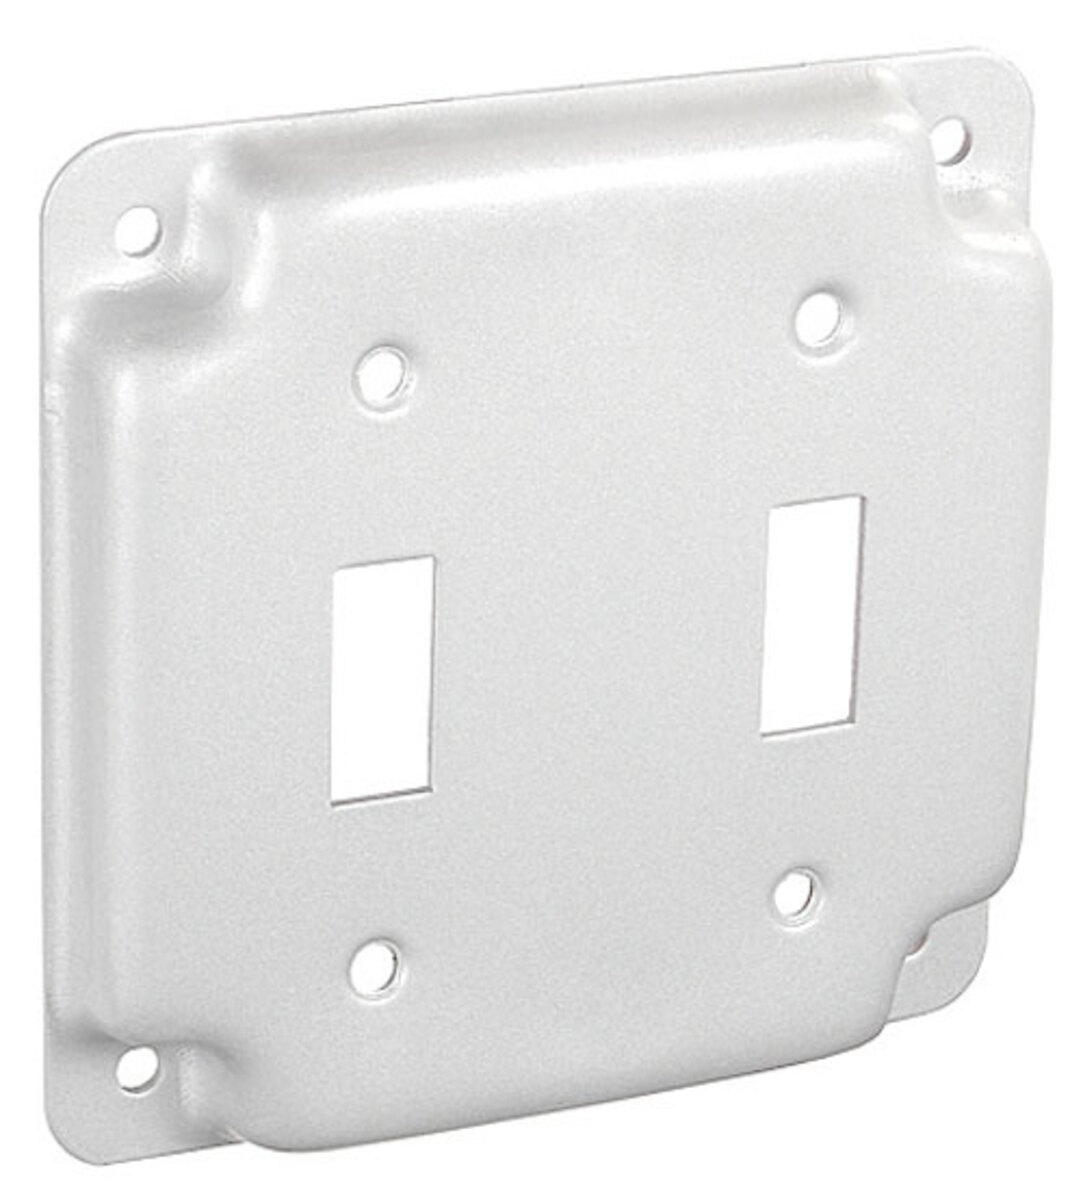 4" Square Industrial Surface Cover, 1/2" Raised - (2) Toggle, Stainless Steel